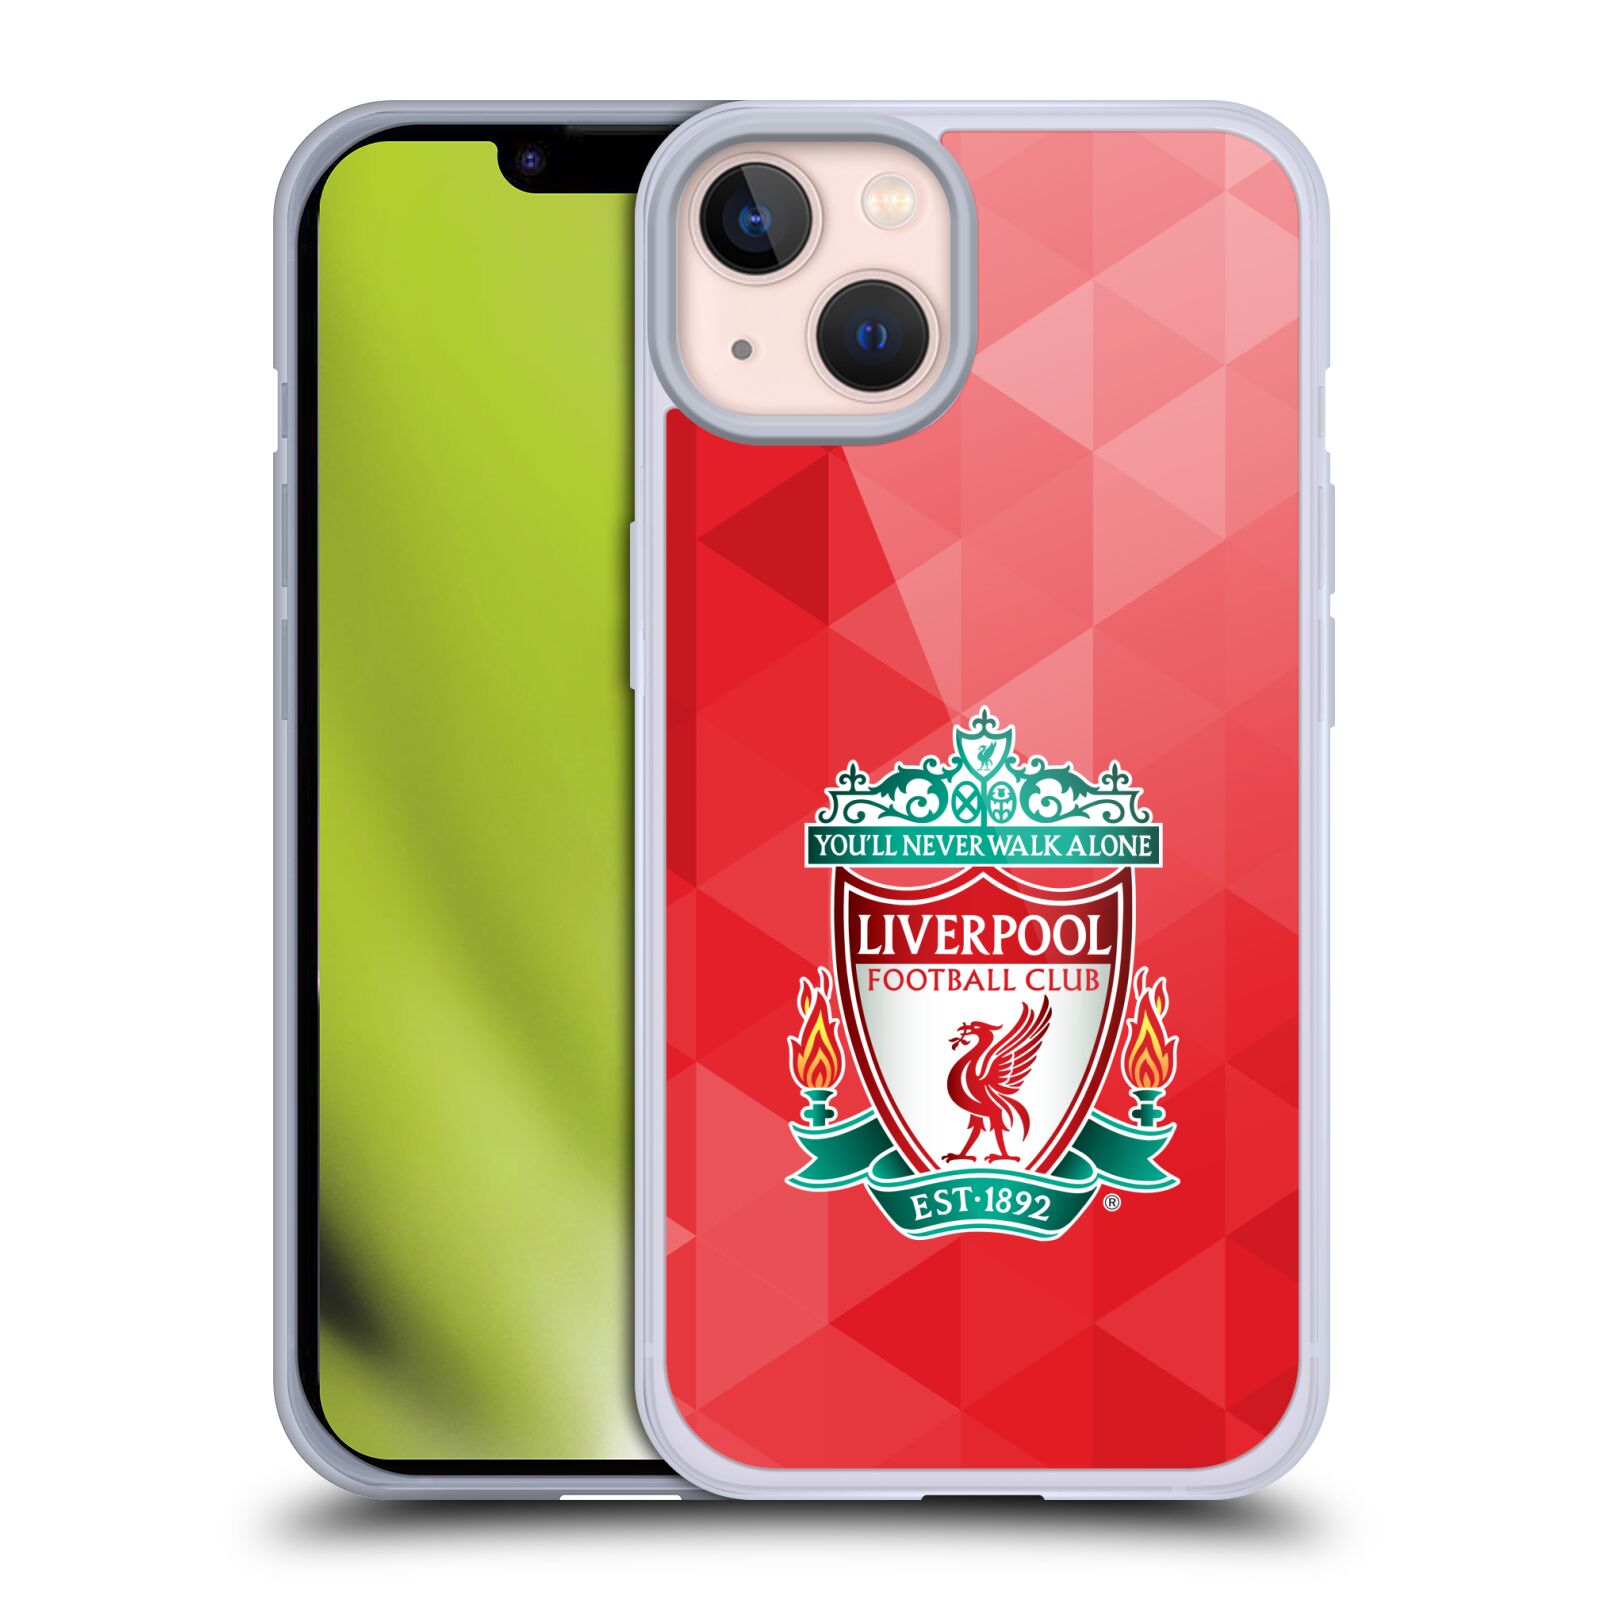 Silikonové pouzdro na mobil Apple iPhone 13 - Head Case - ZNAK LIVERPOOL FC OFFICIAL GEOMETRIC RED (Silikonový kryt, obal, pouzdro na mobilní telefon Apple iPhone 13 s motivem ZNAK LIVERPOOL FC OFFICIAL GEOMETRIC RED)